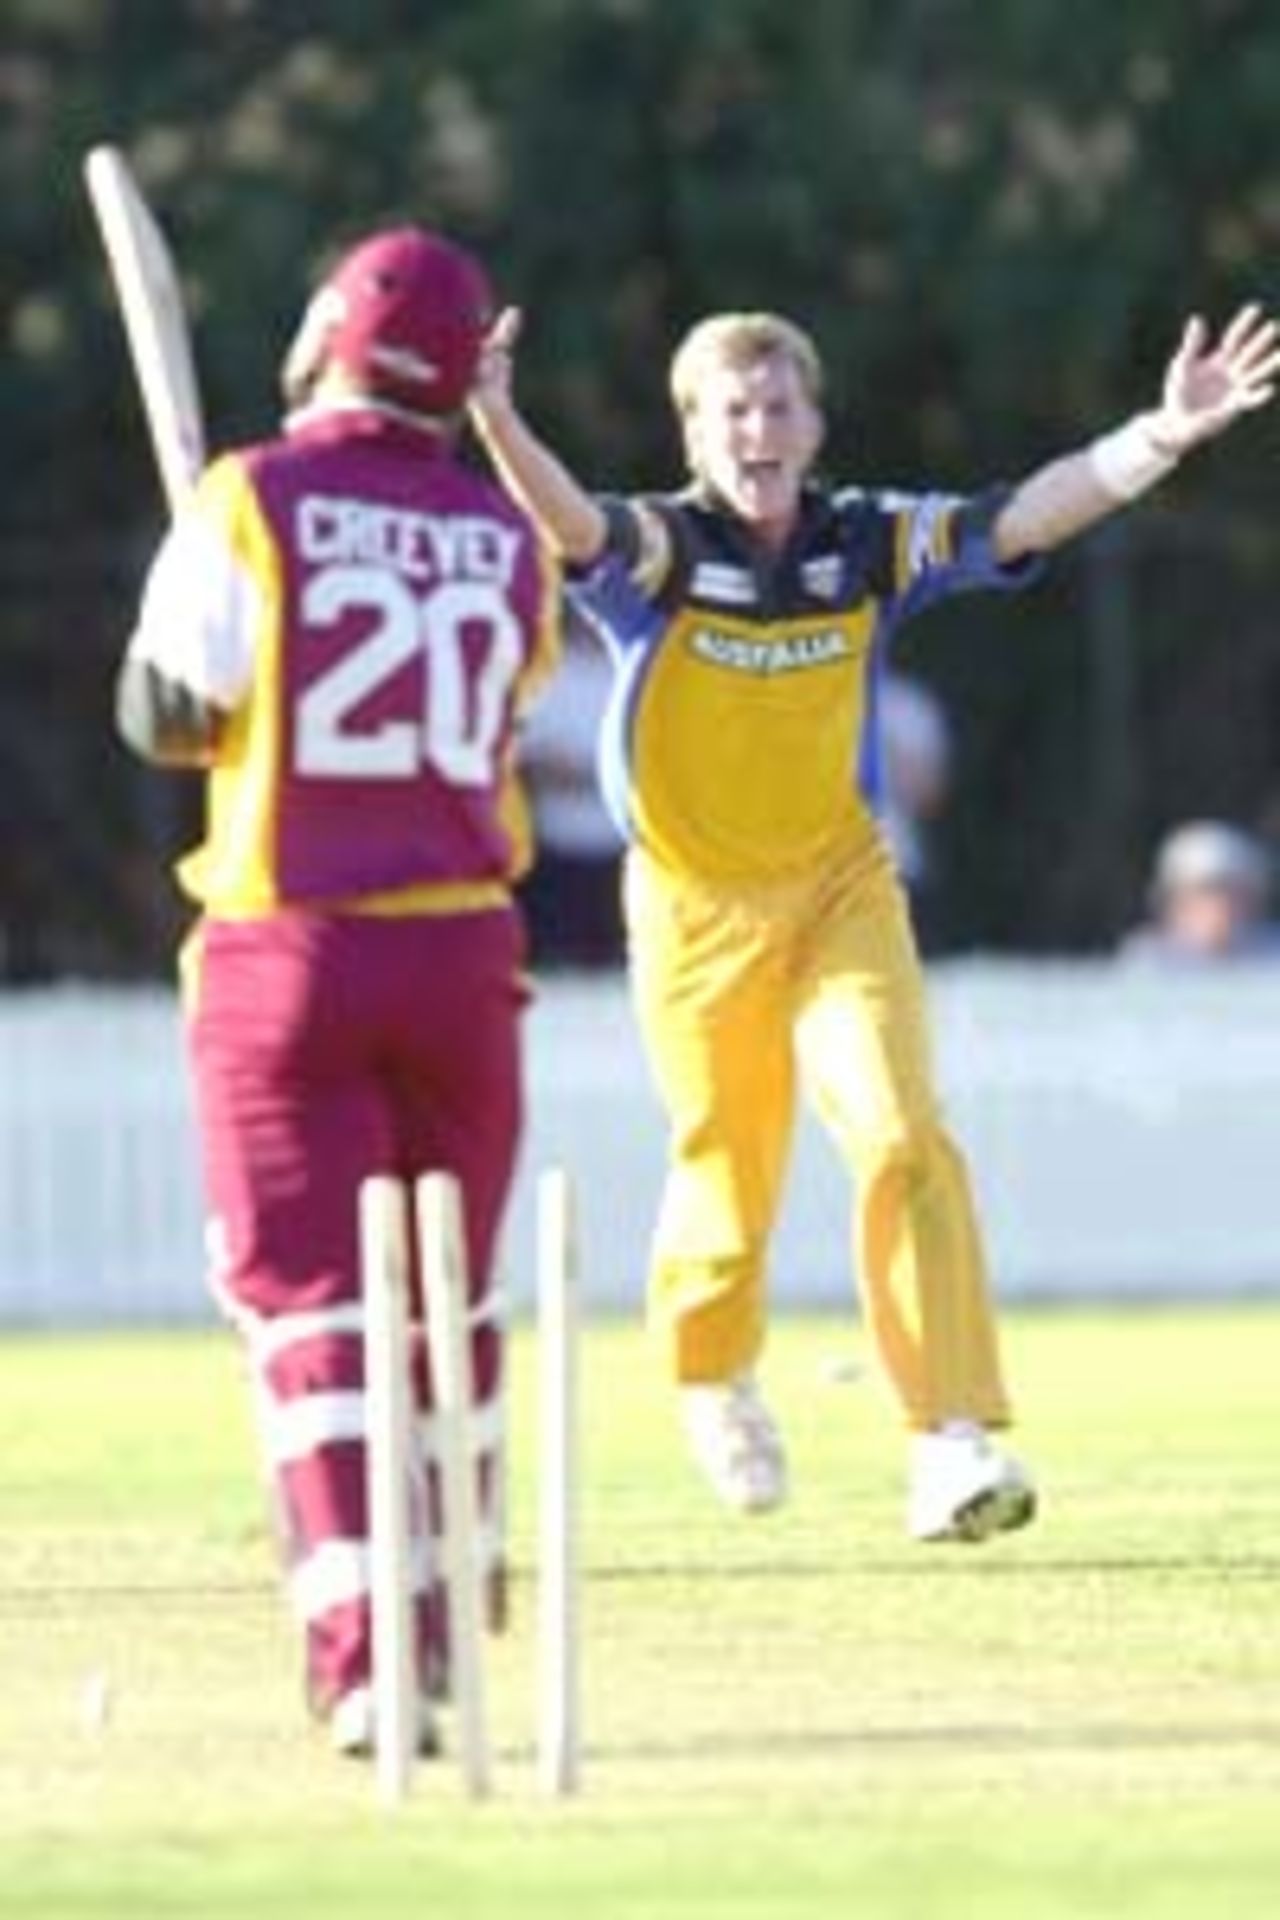 11 Aug 2000: Brett Lee of Australia celebrates getting the wicket of Brendan Creevey of Queensland during the Australia versus Queensland practice match played at Allan Border Field in Brisbane, Australia. The Australian team are playing the practice match to prepare for the Super Challenge 2000 against South Africa.